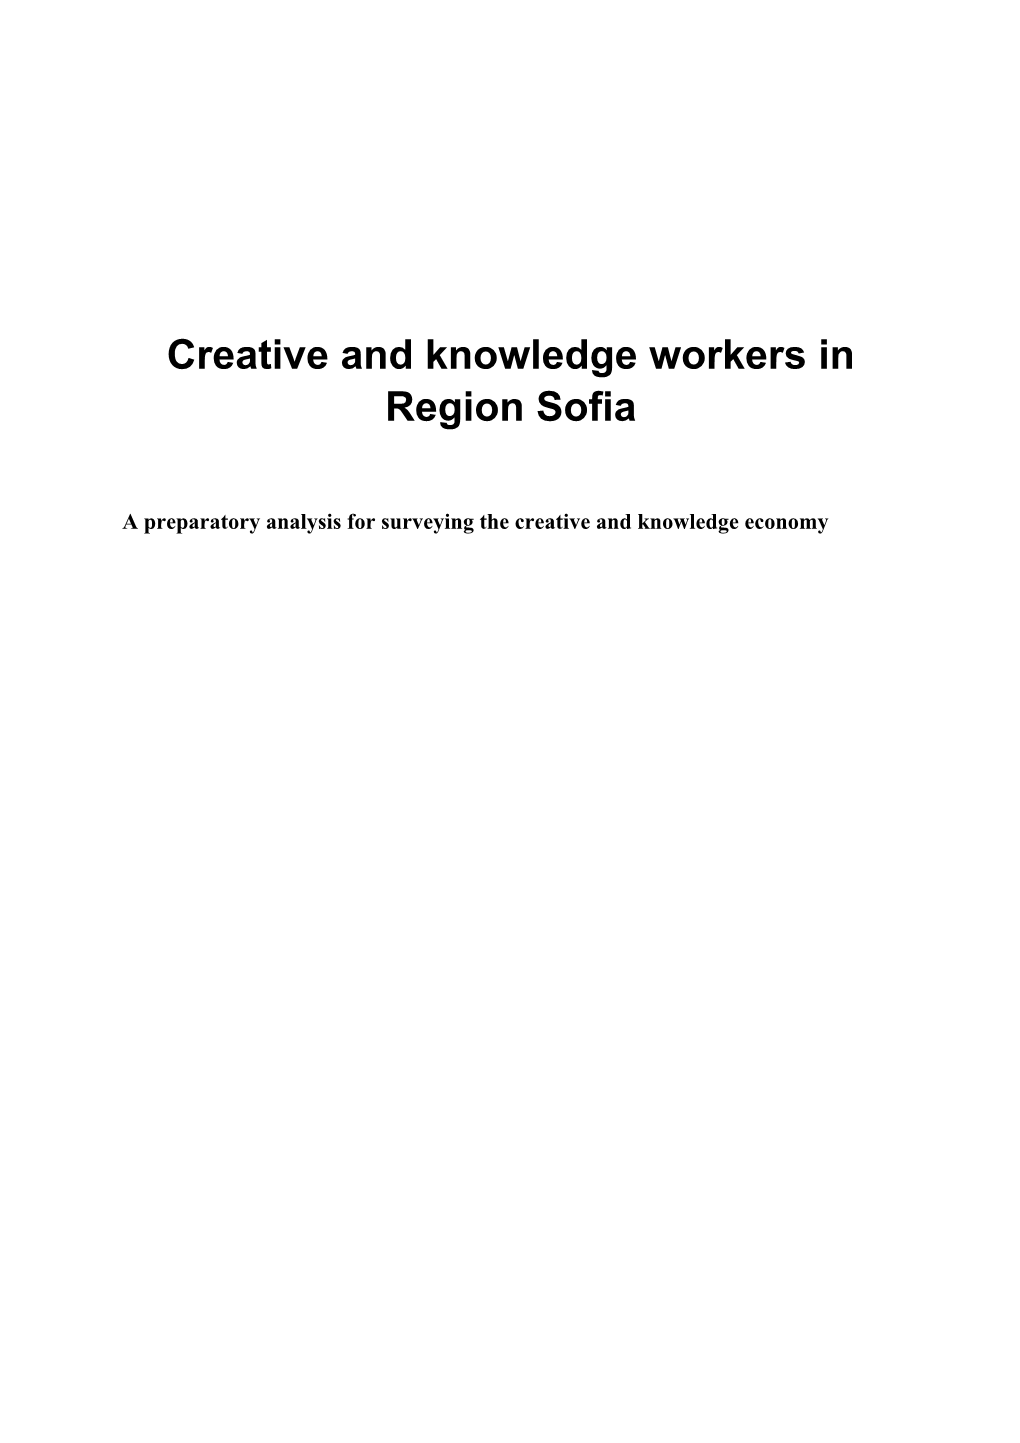 Creative and Knowledge Workers in Region Sofia